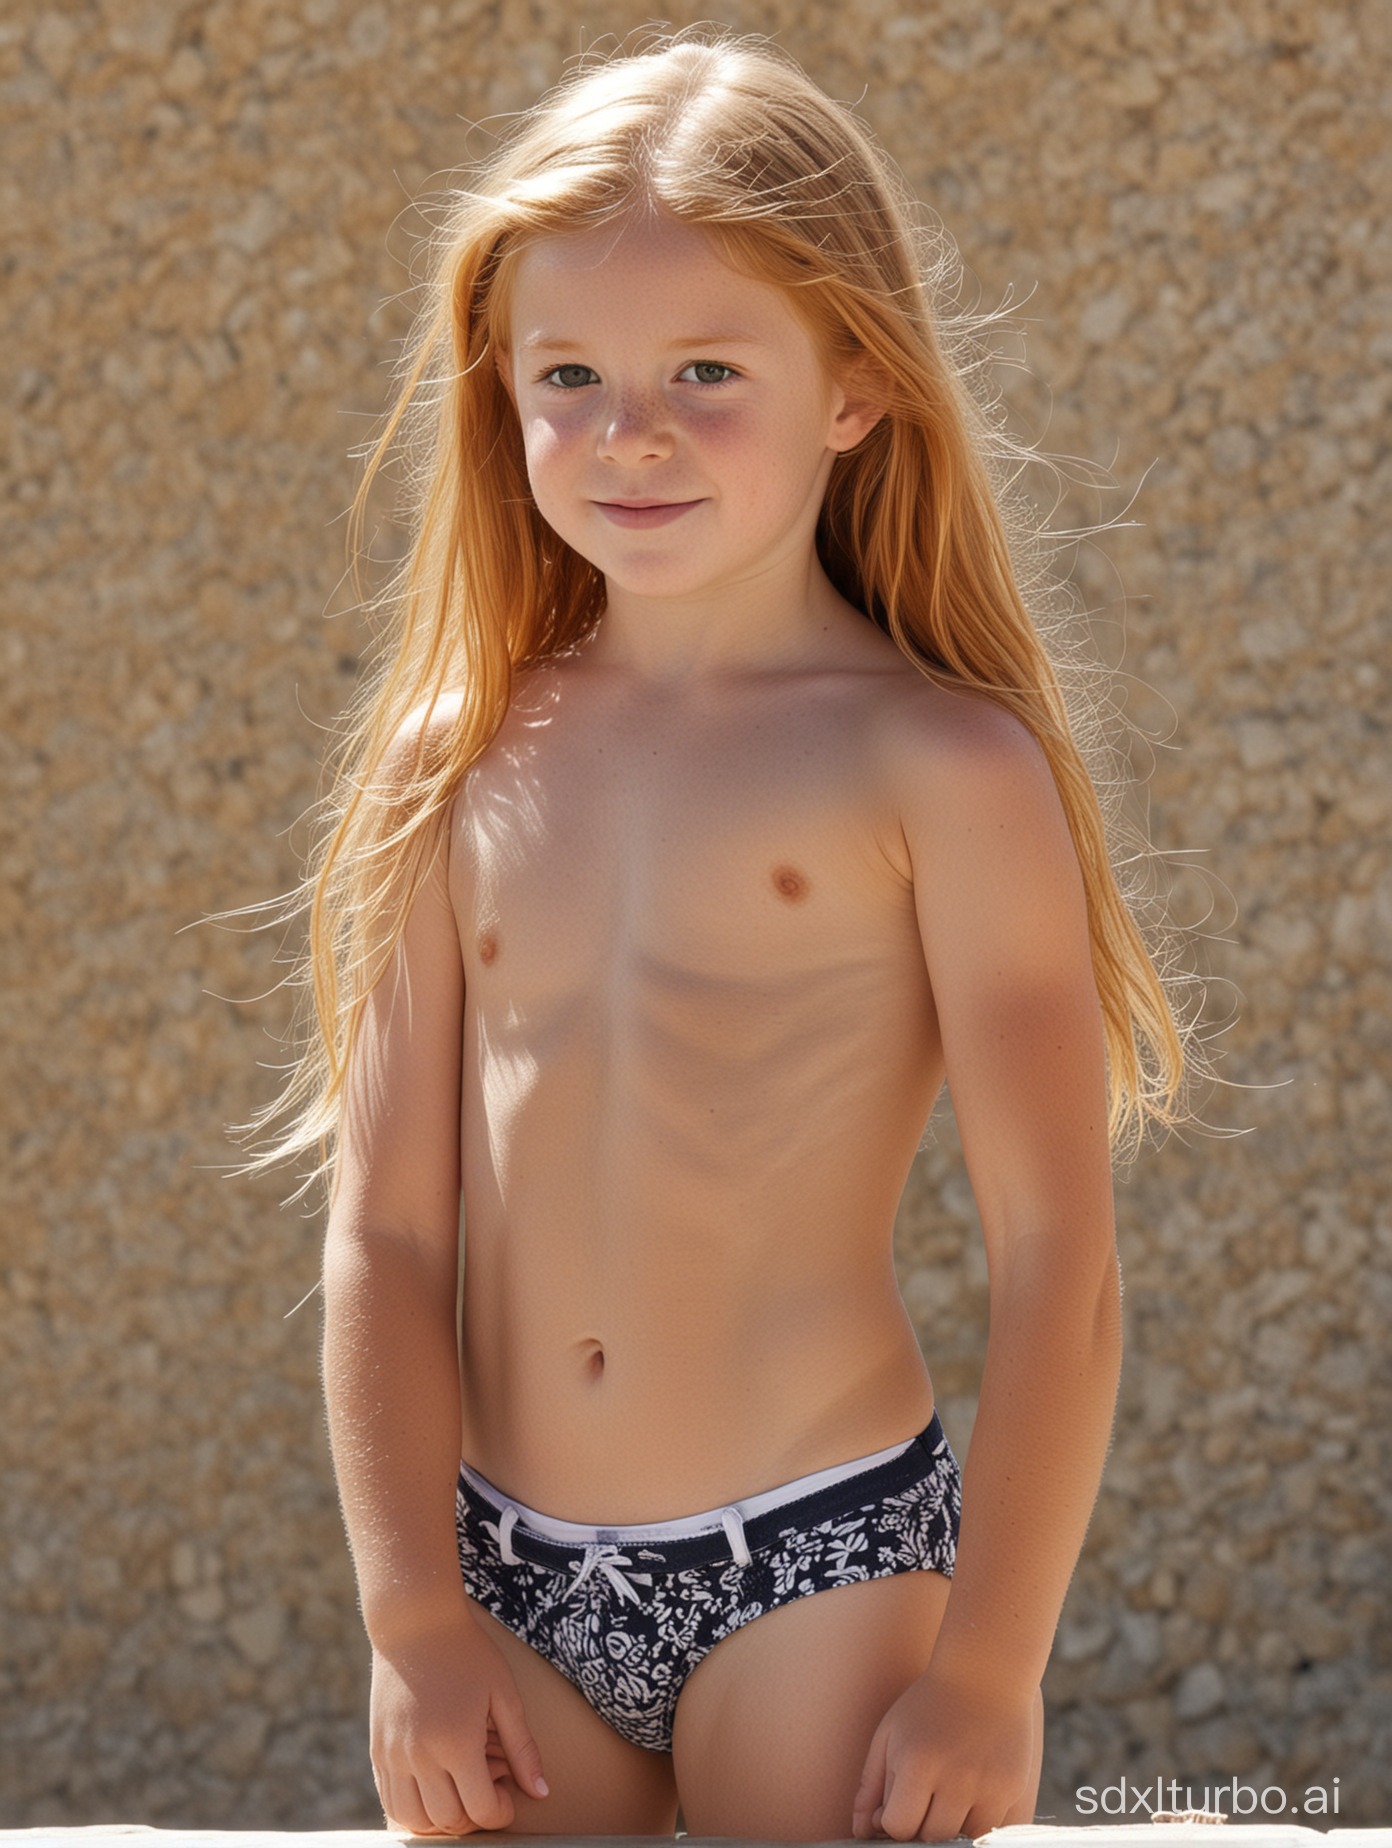 8 years old, long ginger hair, flat chested, very muscular abs, showing her belly, at Saint-Tropez